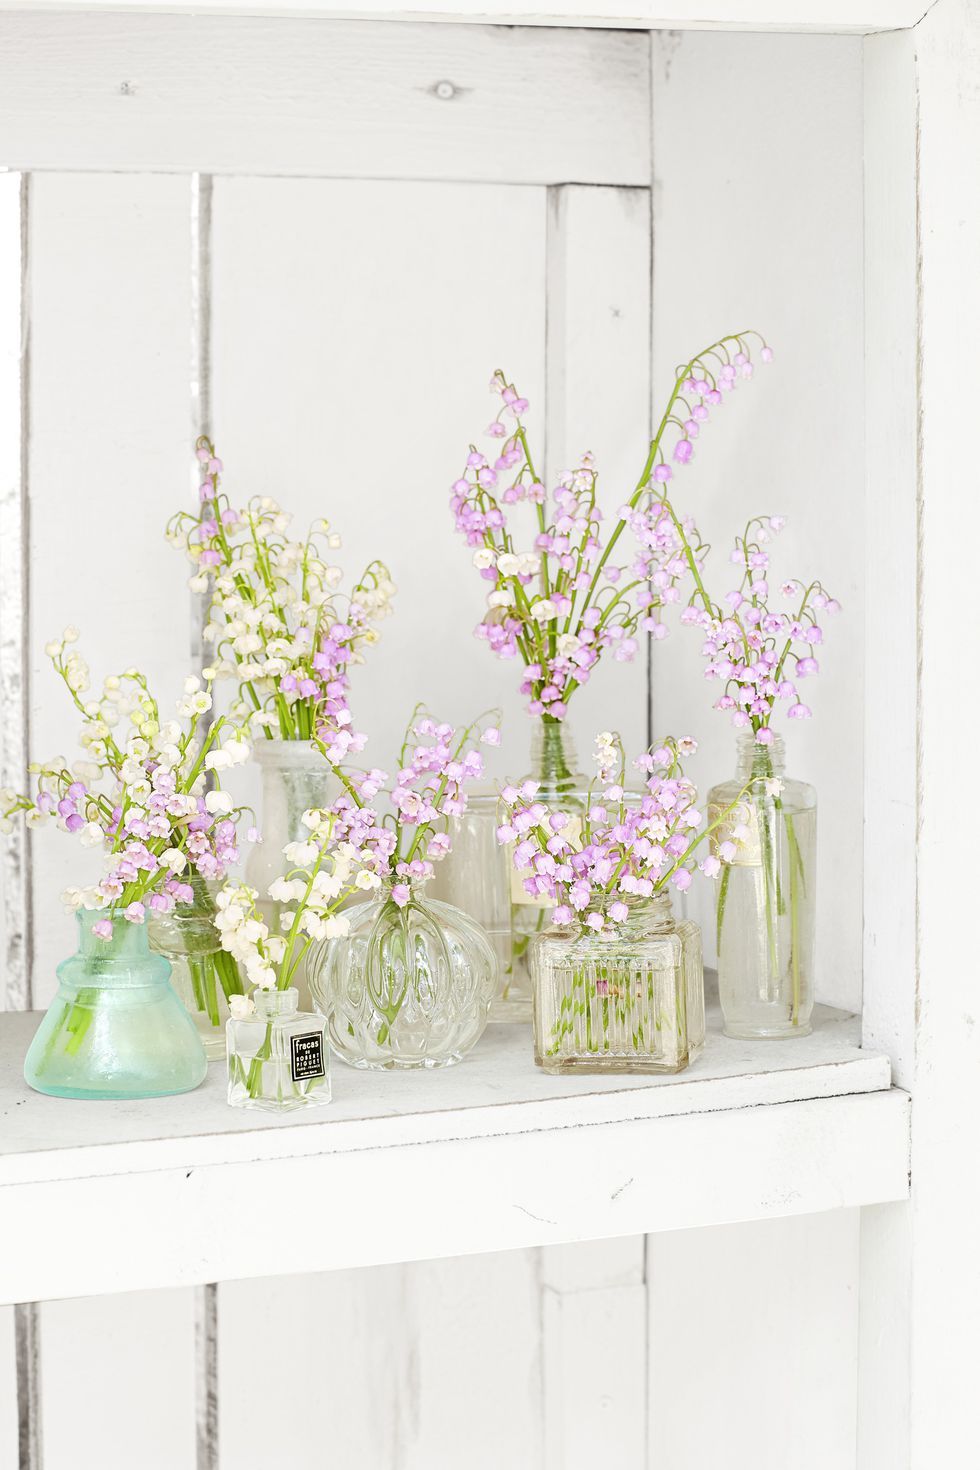 56 Spring Centerpieces and Table Decorations - Ideas for Spring Table  Settings